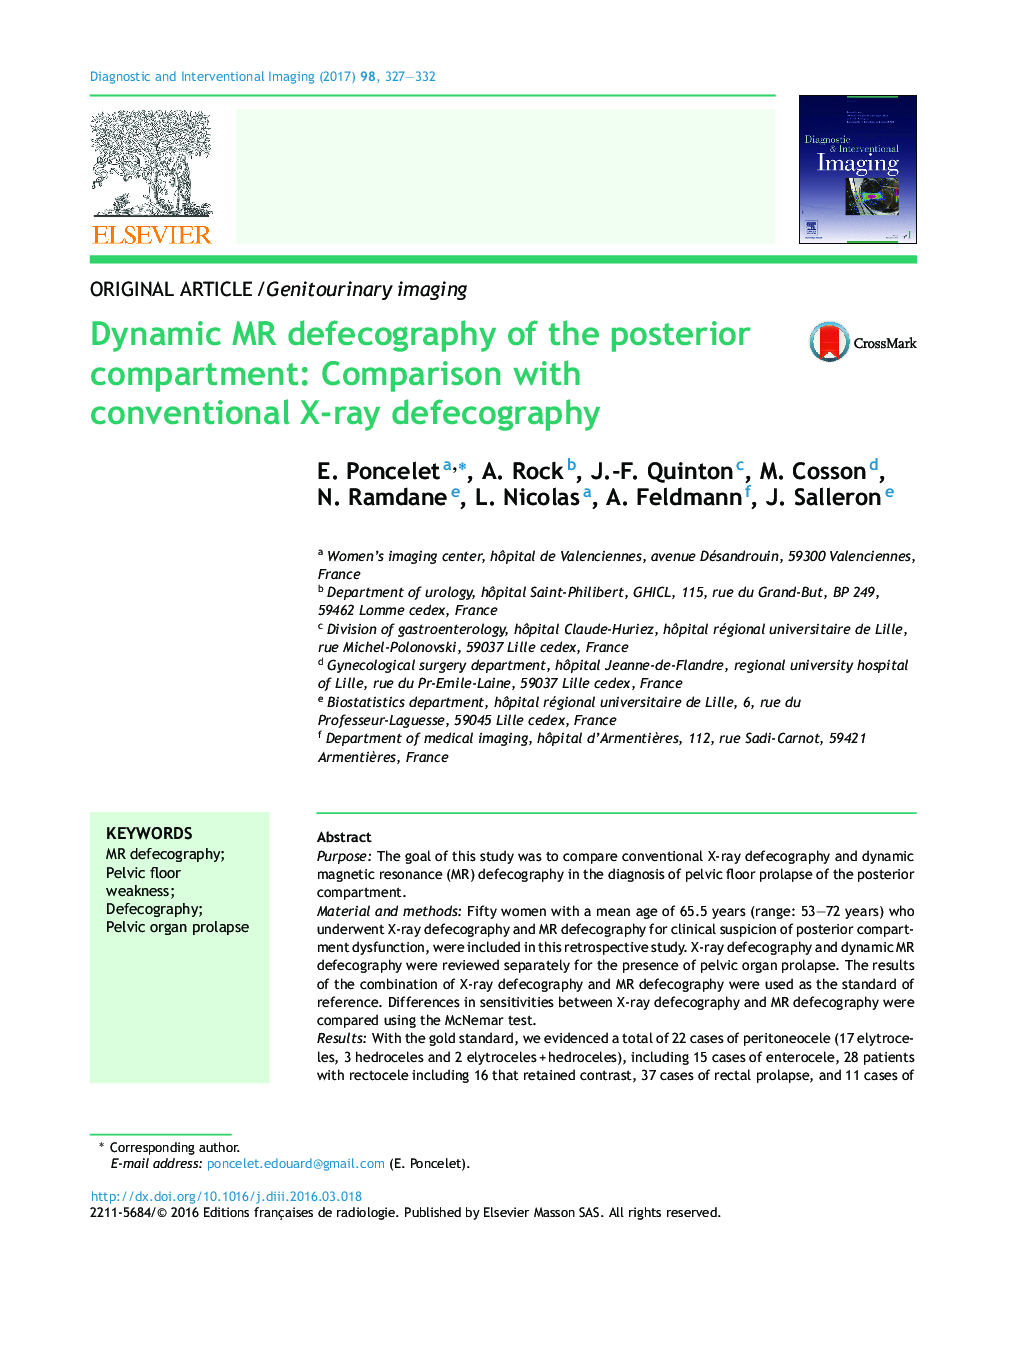 Dynamic MR defecography of the posterior compartment: Comparison with conventional X-ray defecography